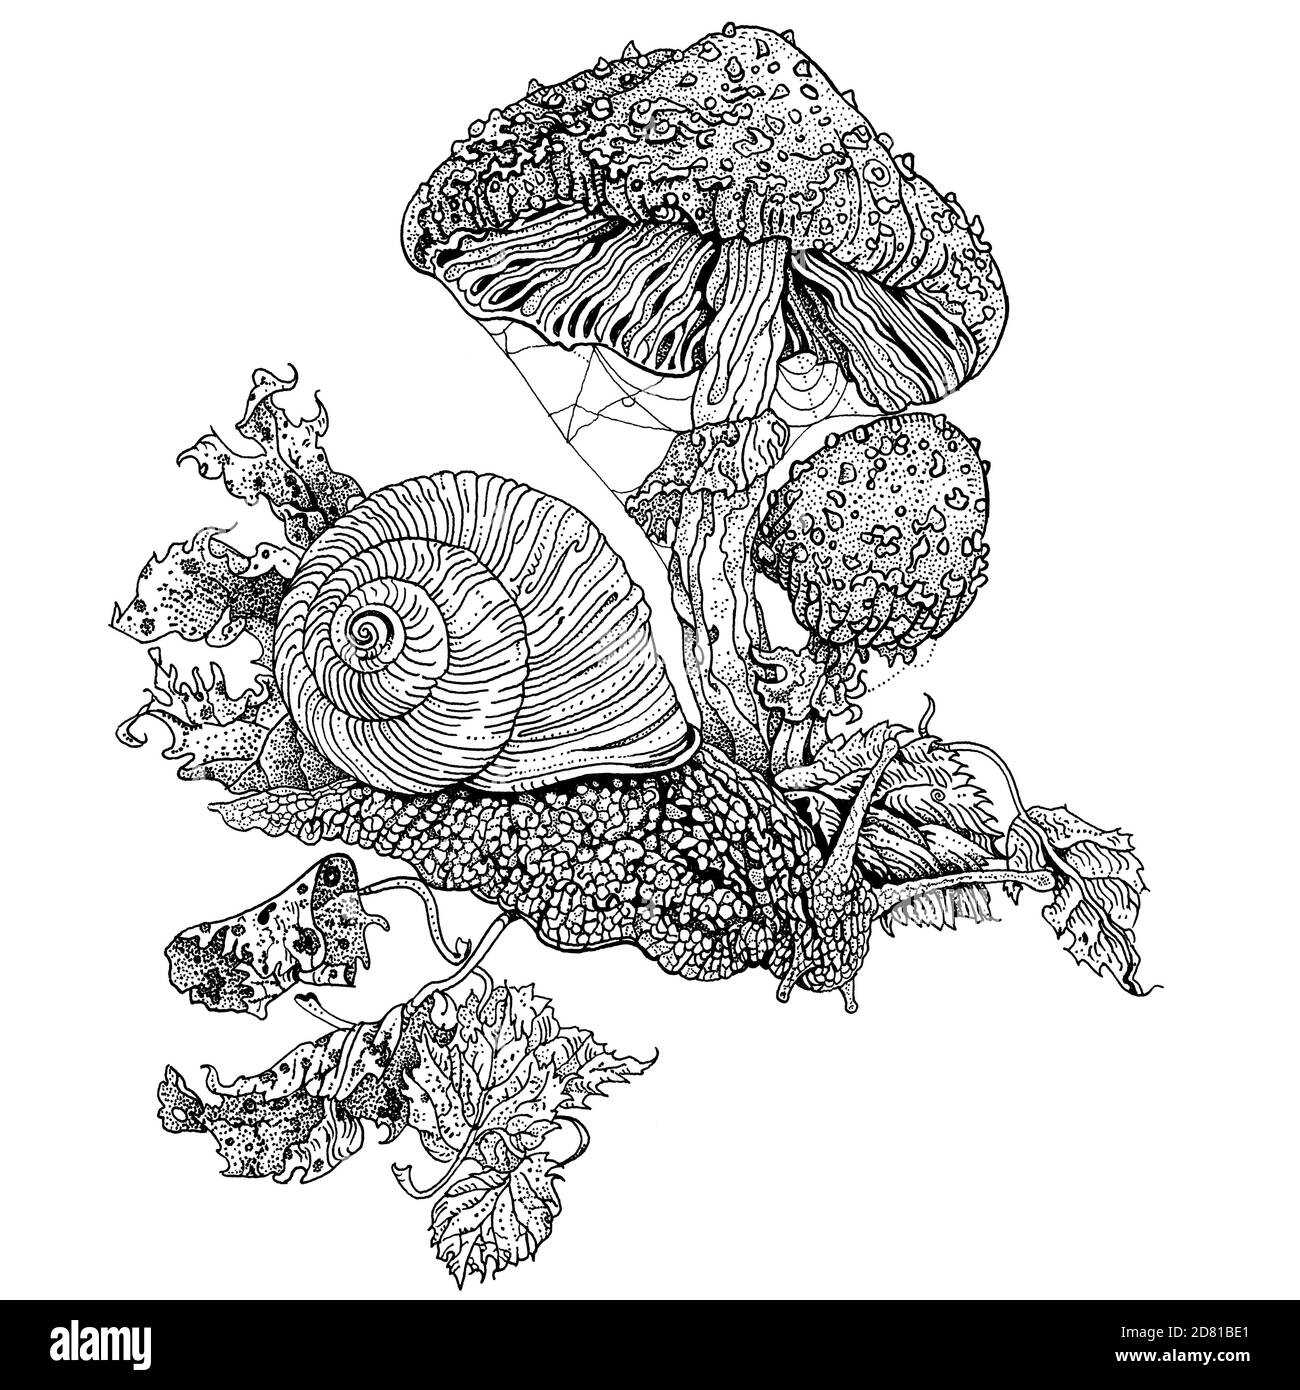 Snail and fly agaric. Hand drawn detailed ink pen illustration. T shirt print, tattoo design in dotwork style. Nature, folklore, wildlife concept. Stock Photo